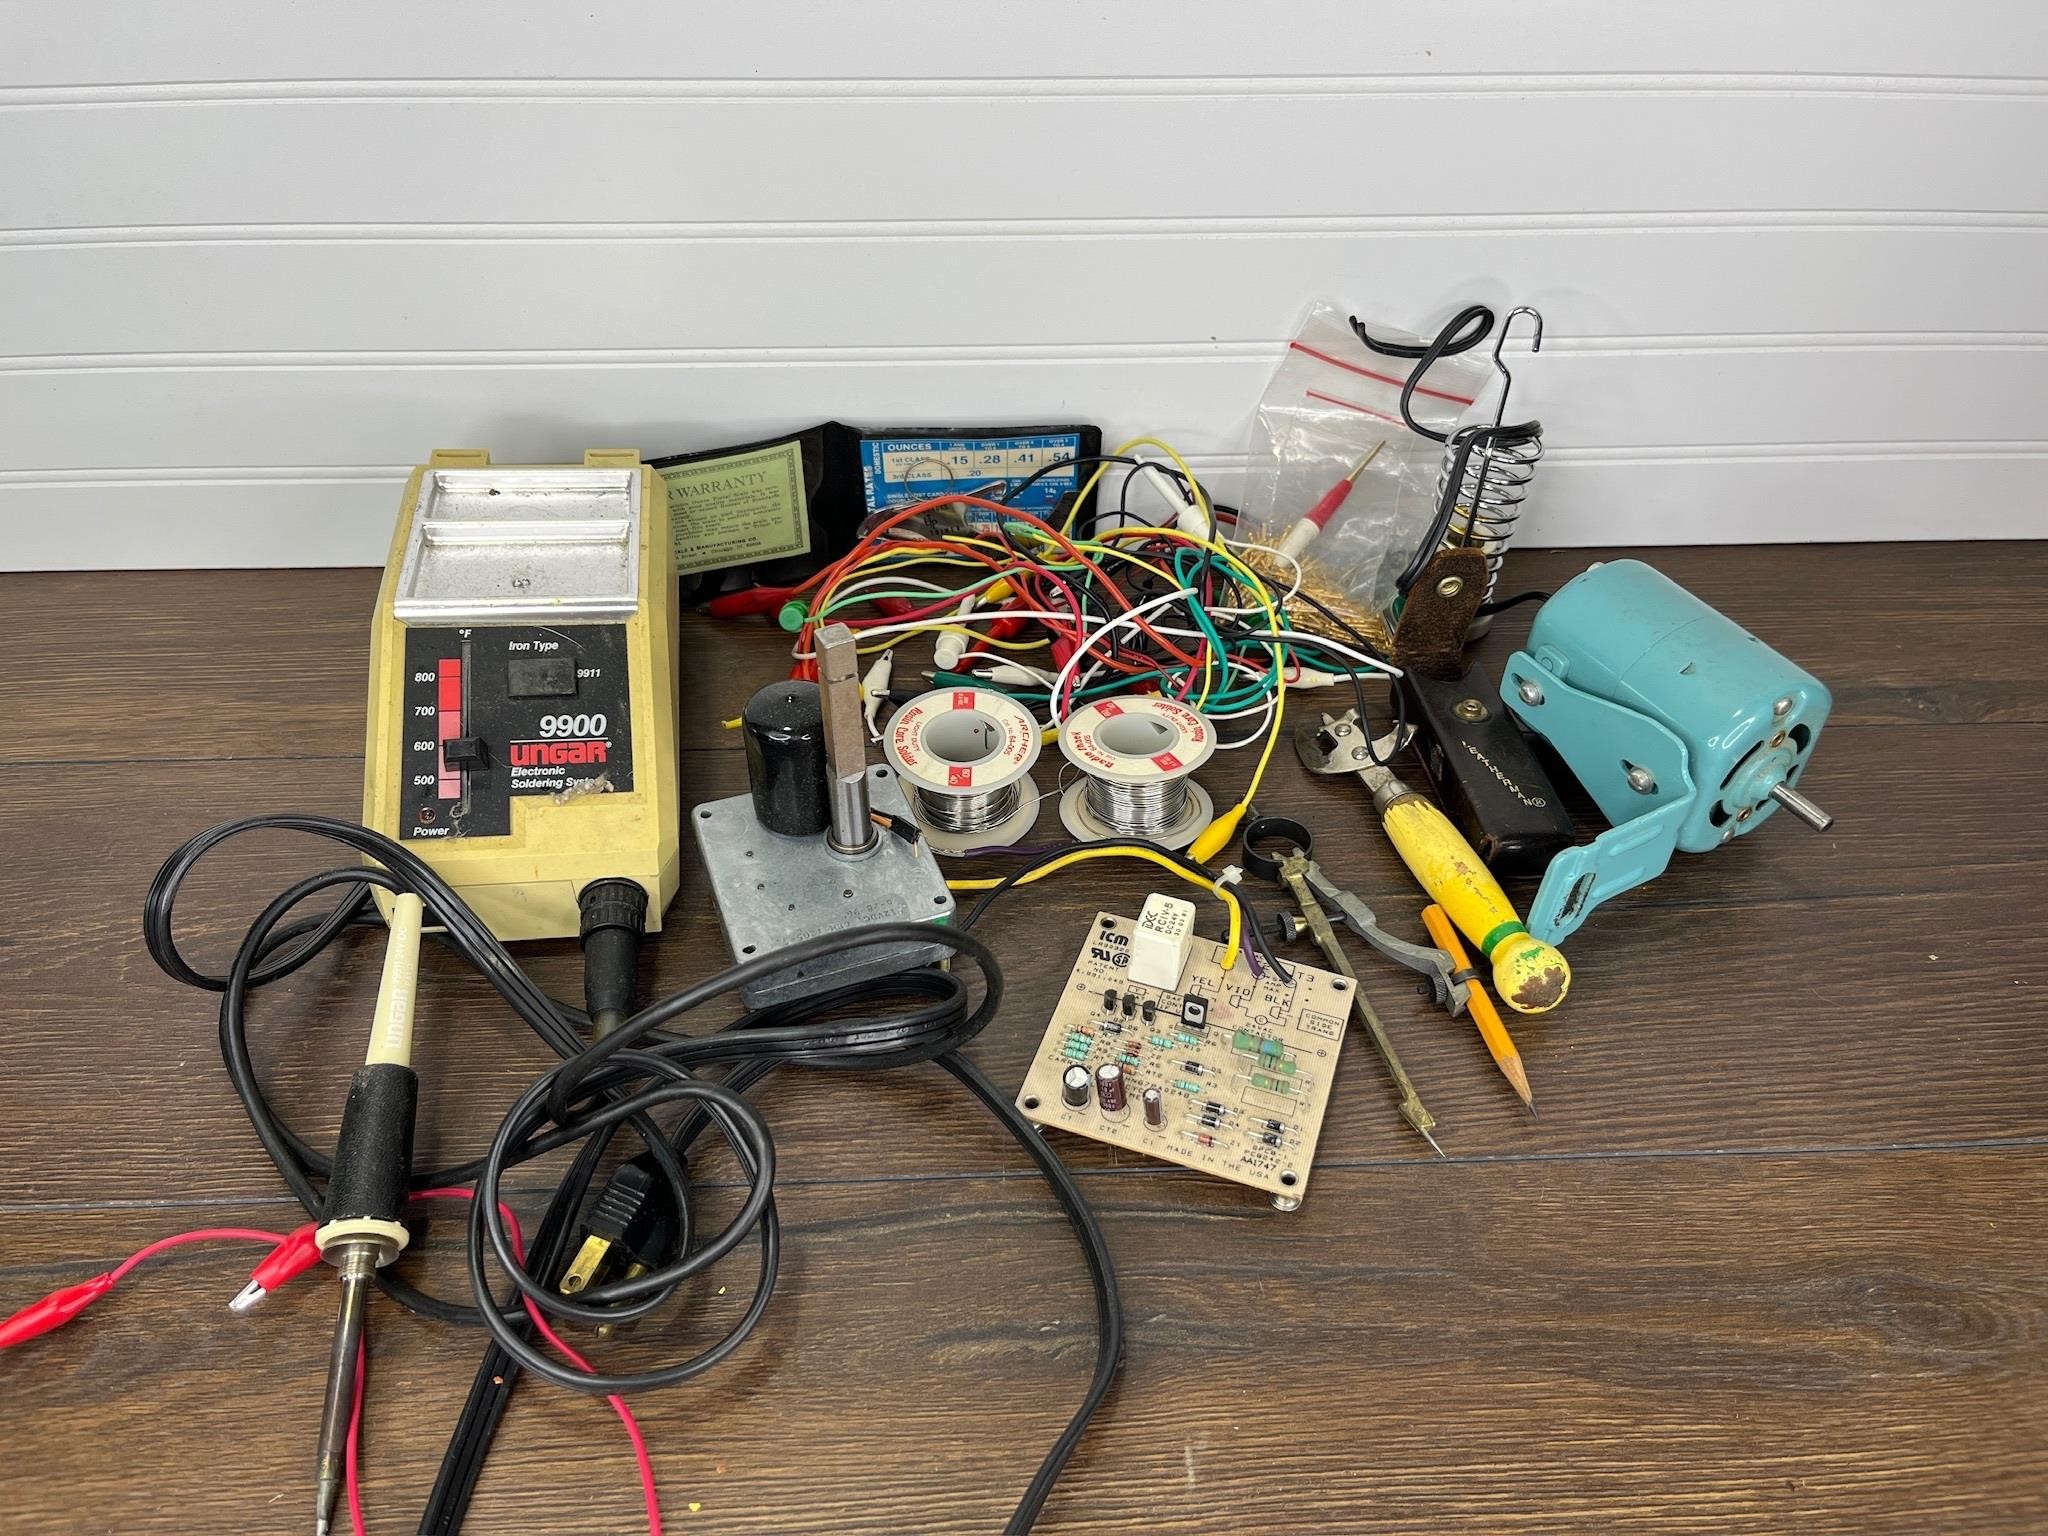 Electronics, Wires & More From Garage Shelf